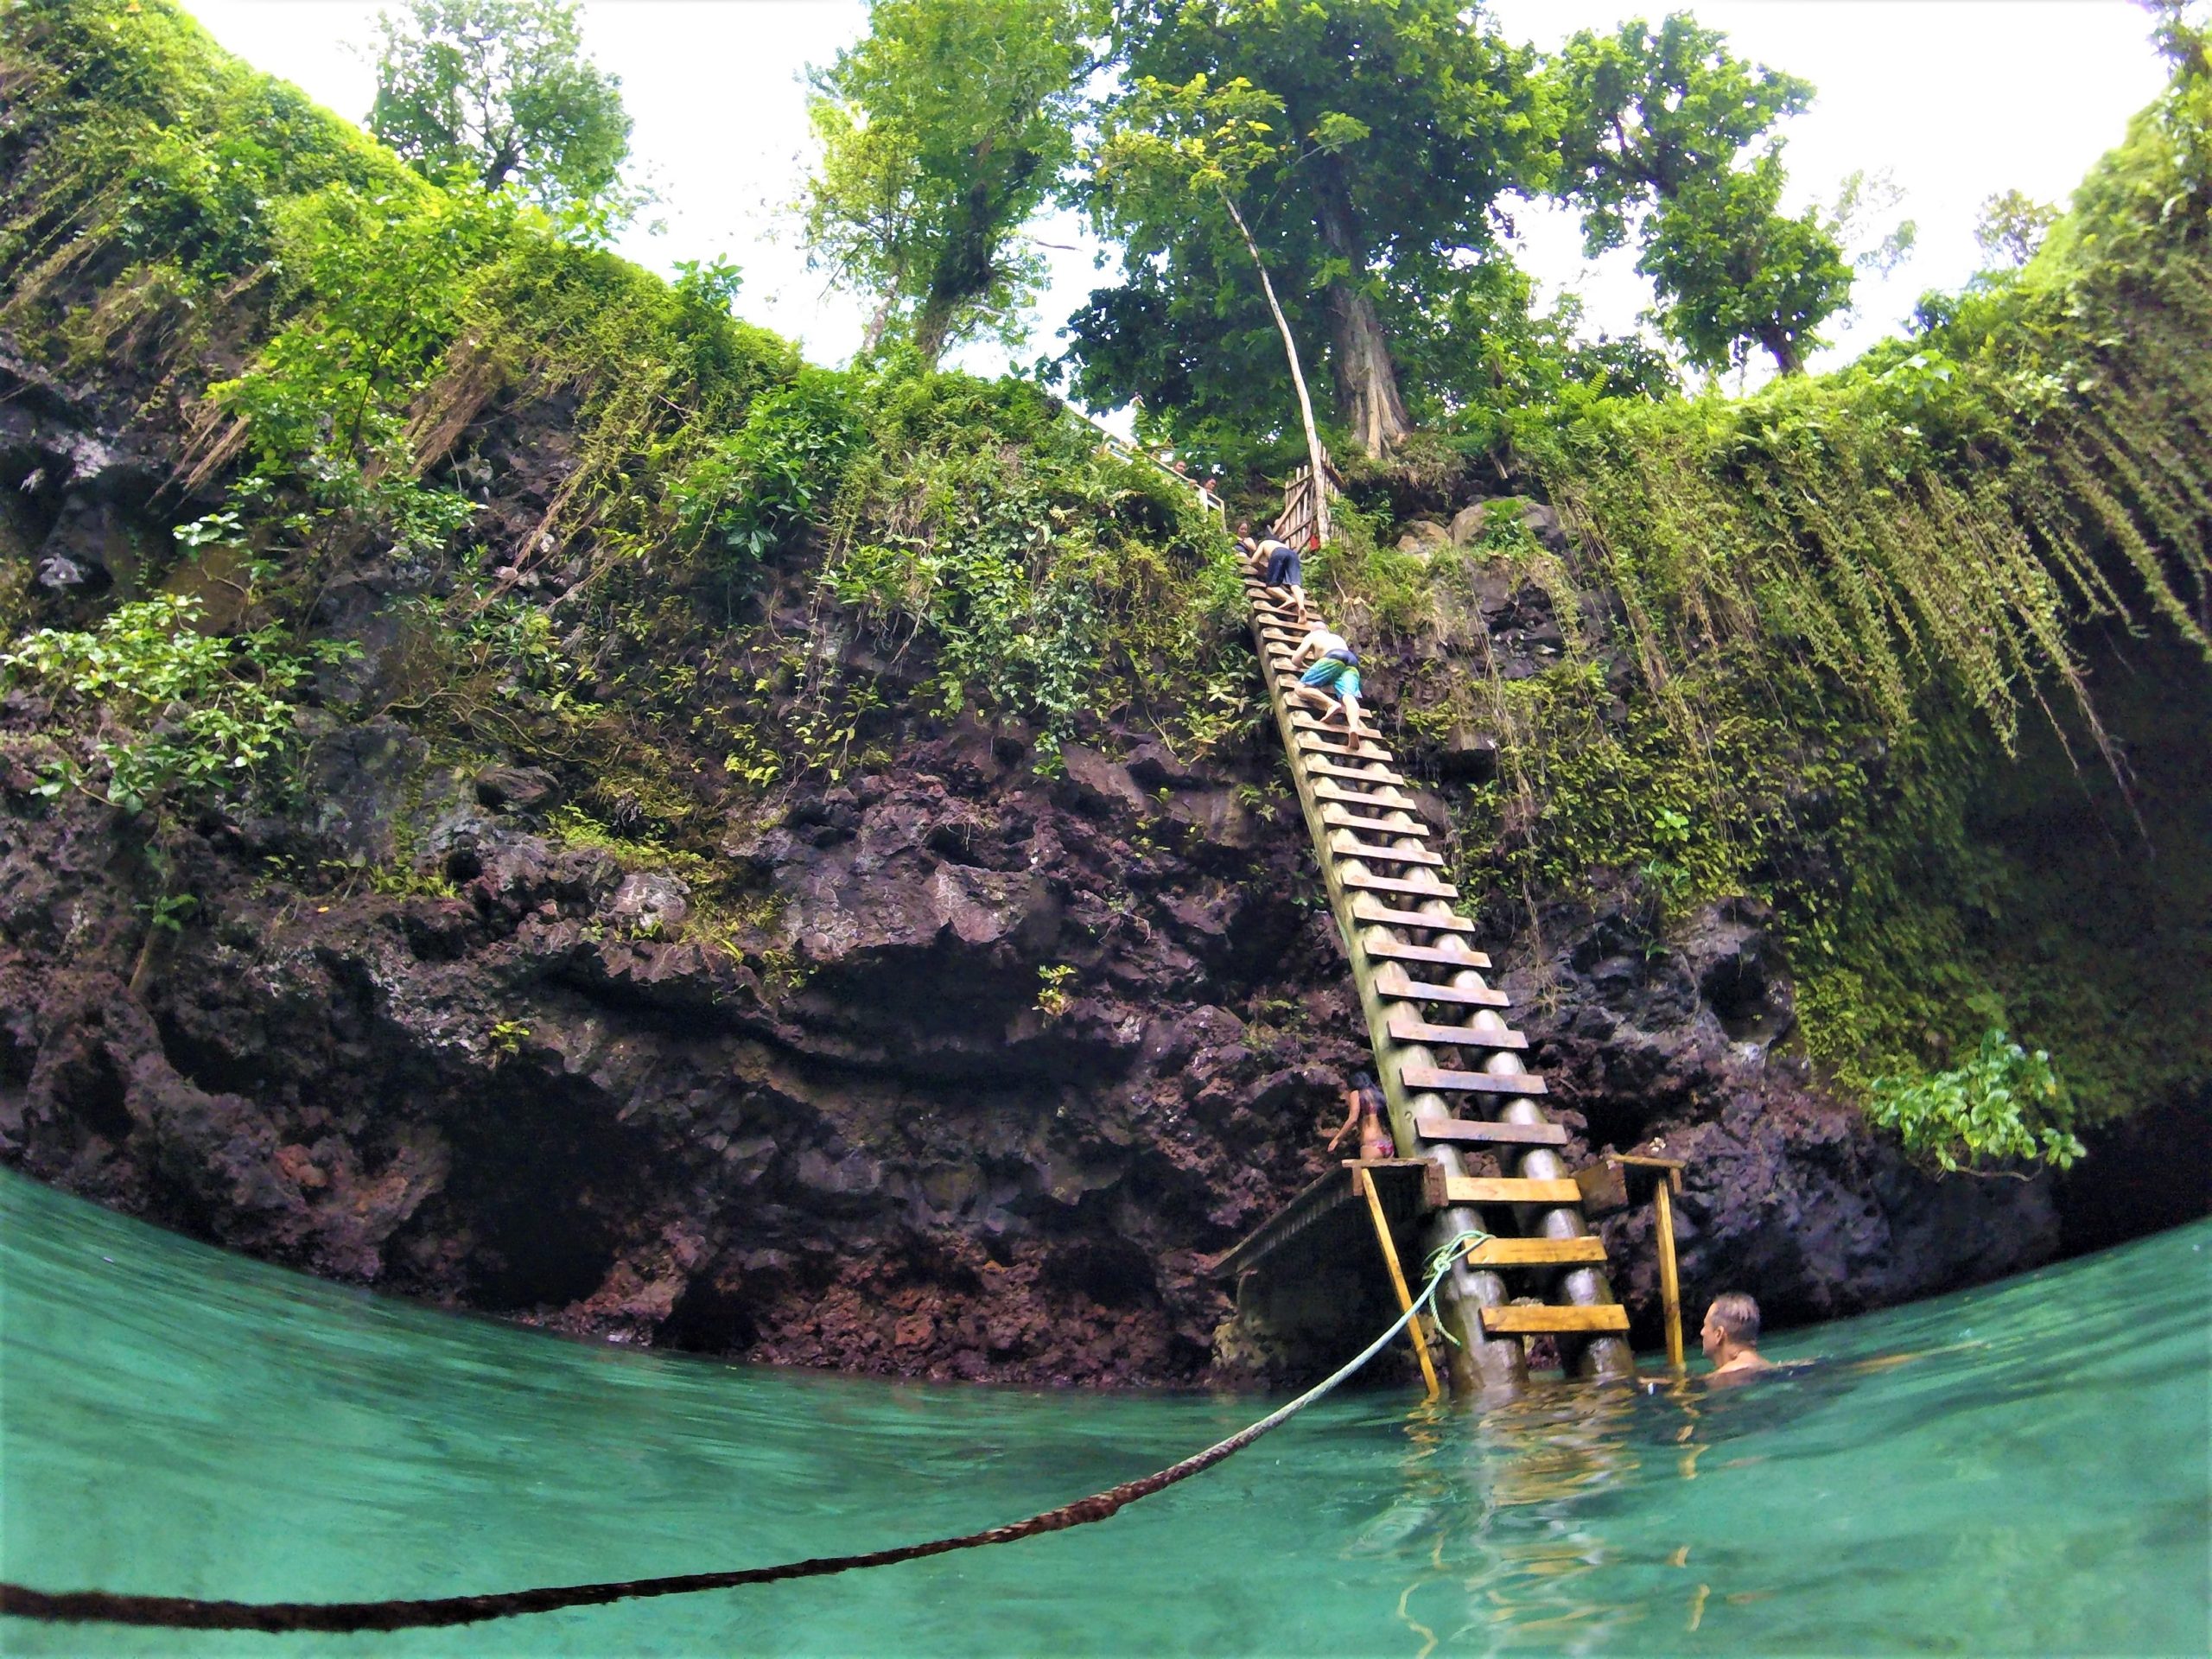 That's quite a climb! To Sua ocean trench on Upolu